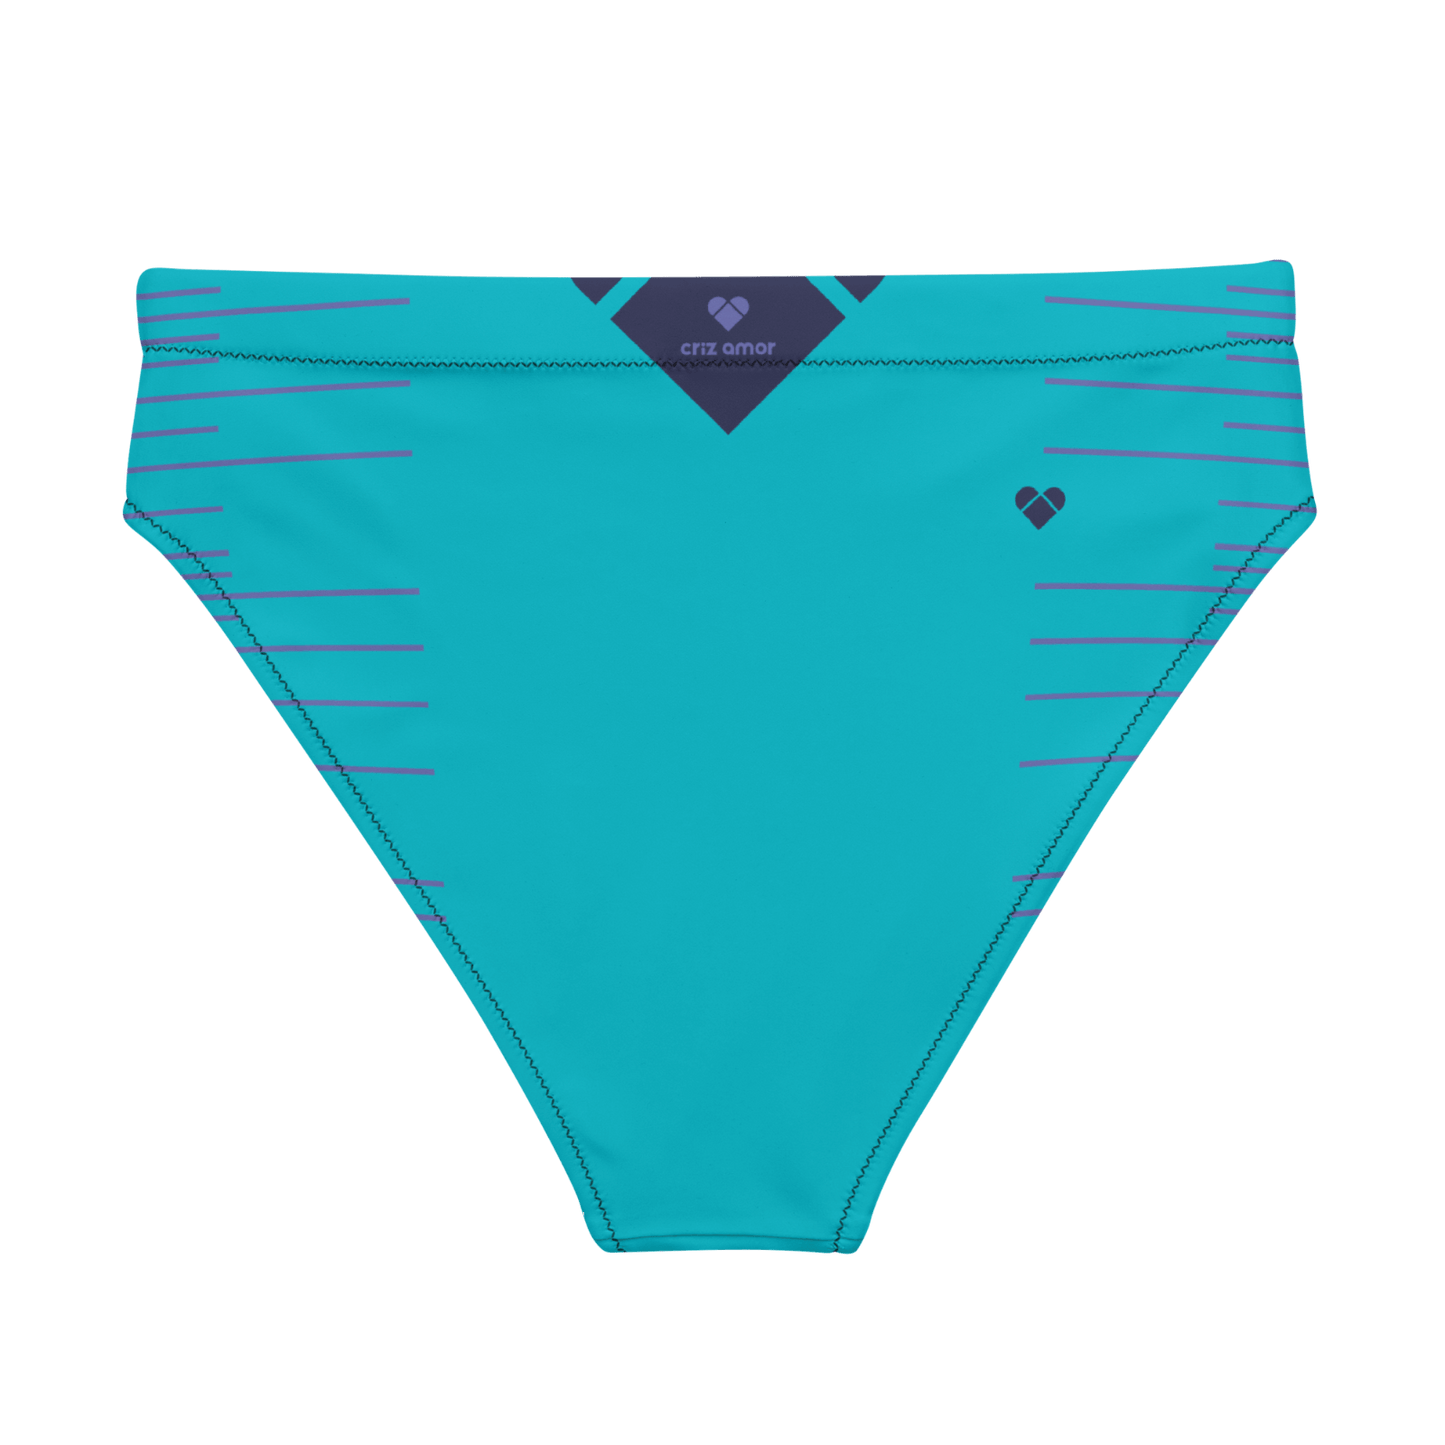 Women's swimwear in turquoise with periwinkle stripes